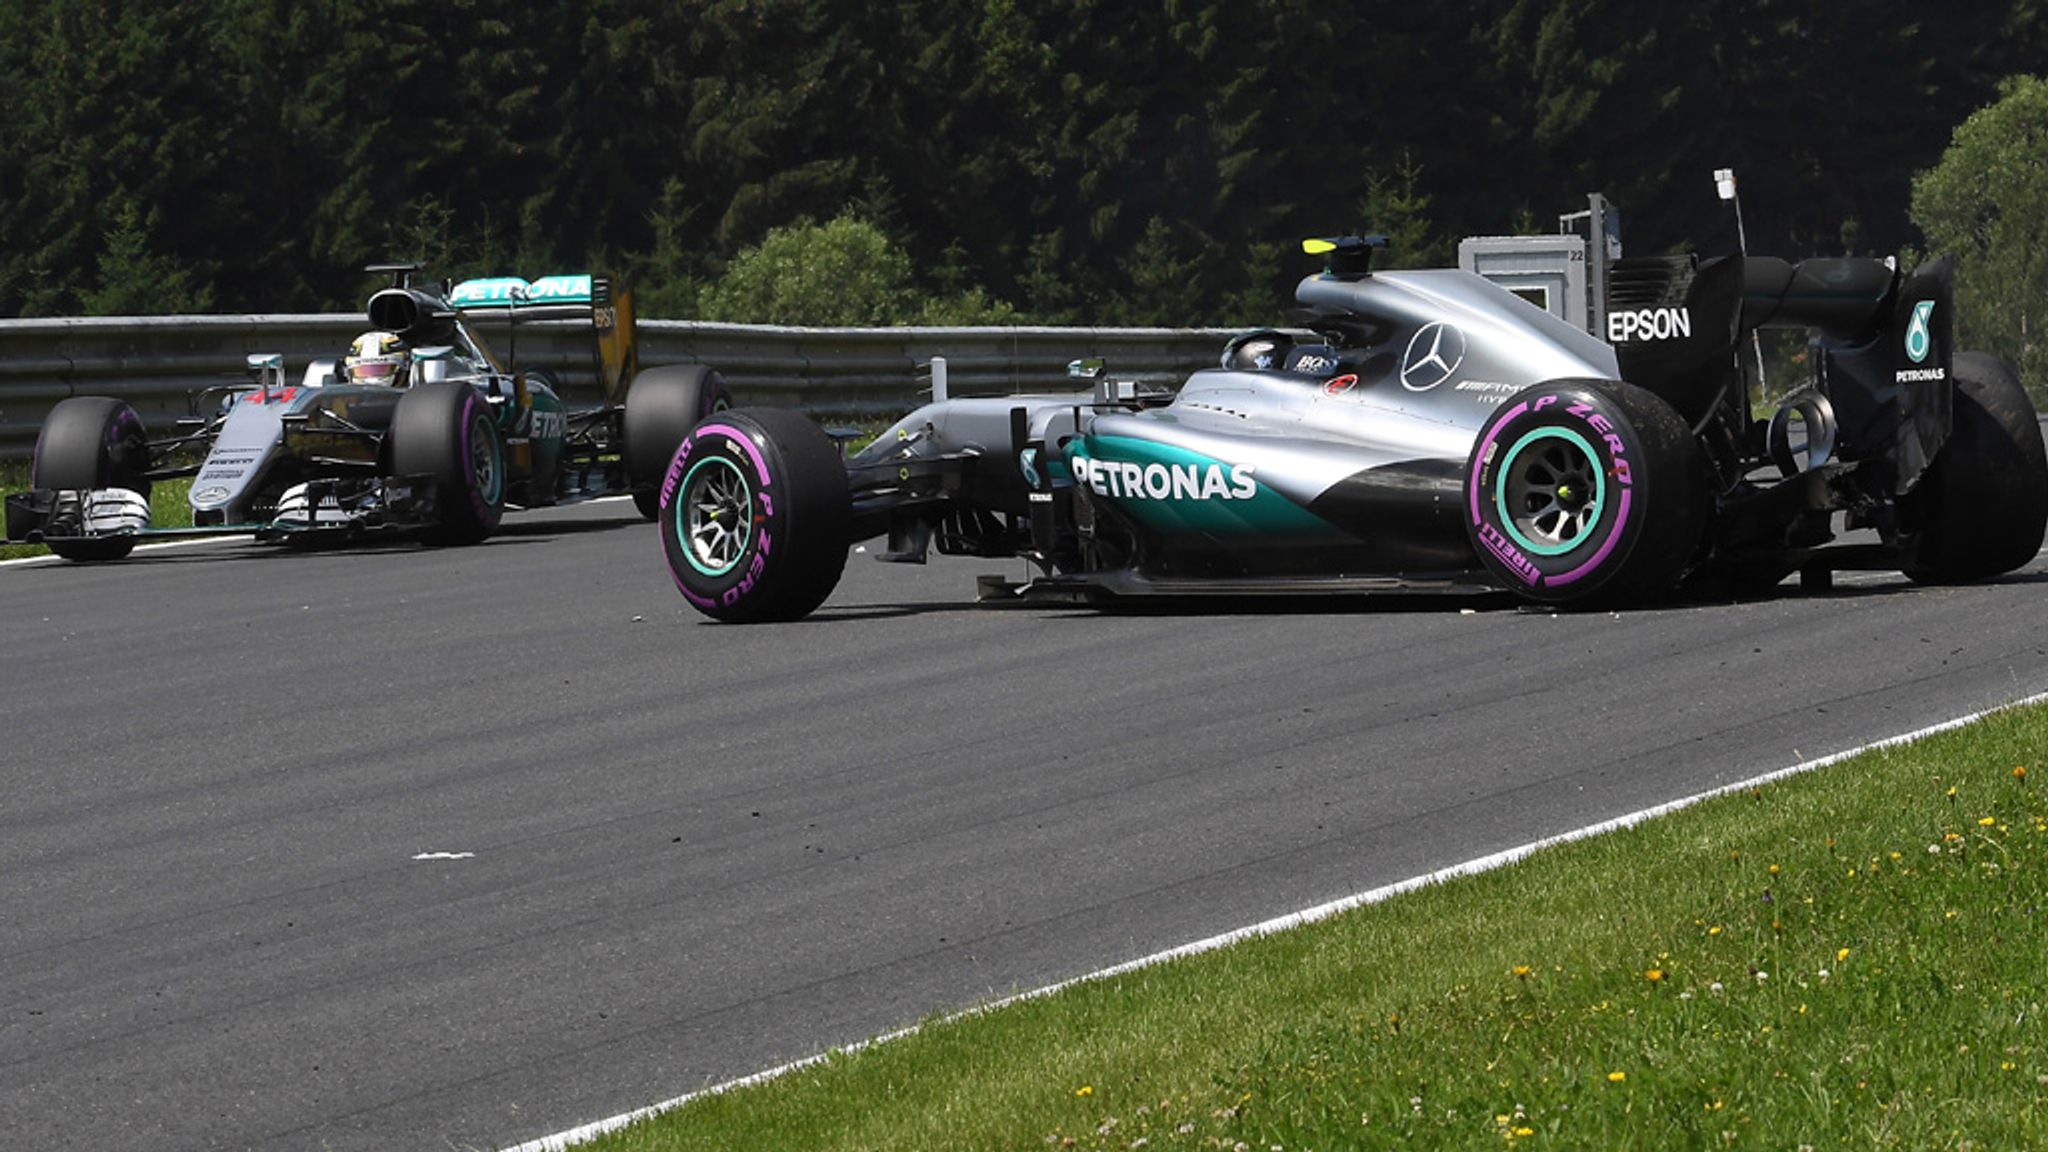 F1 Austrian GP: From EPIC Lewis Hamilton-Nico Rosberg collision to Fernando Alonso ending on TOP of Kimi Raikkonen’s Ferrari - Check out top 5 incidents from Austrian GP